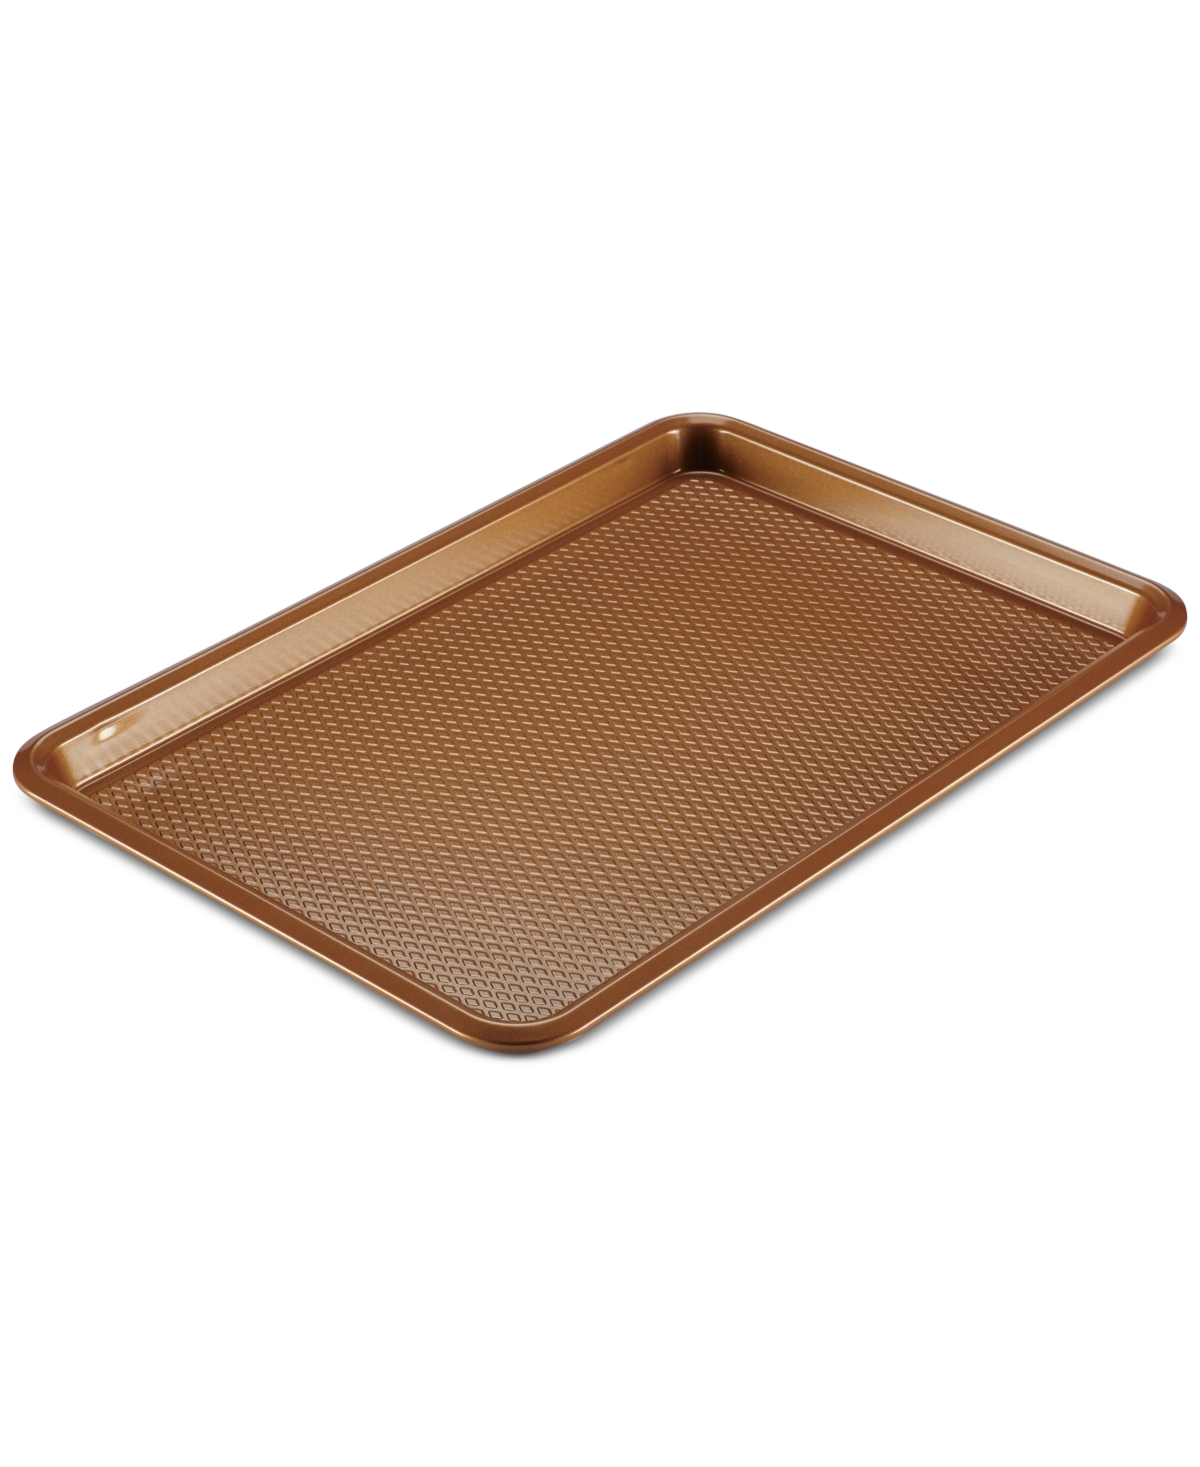 5881266 Ayesha Curry Home Collection Cookie Pan sku 5881266